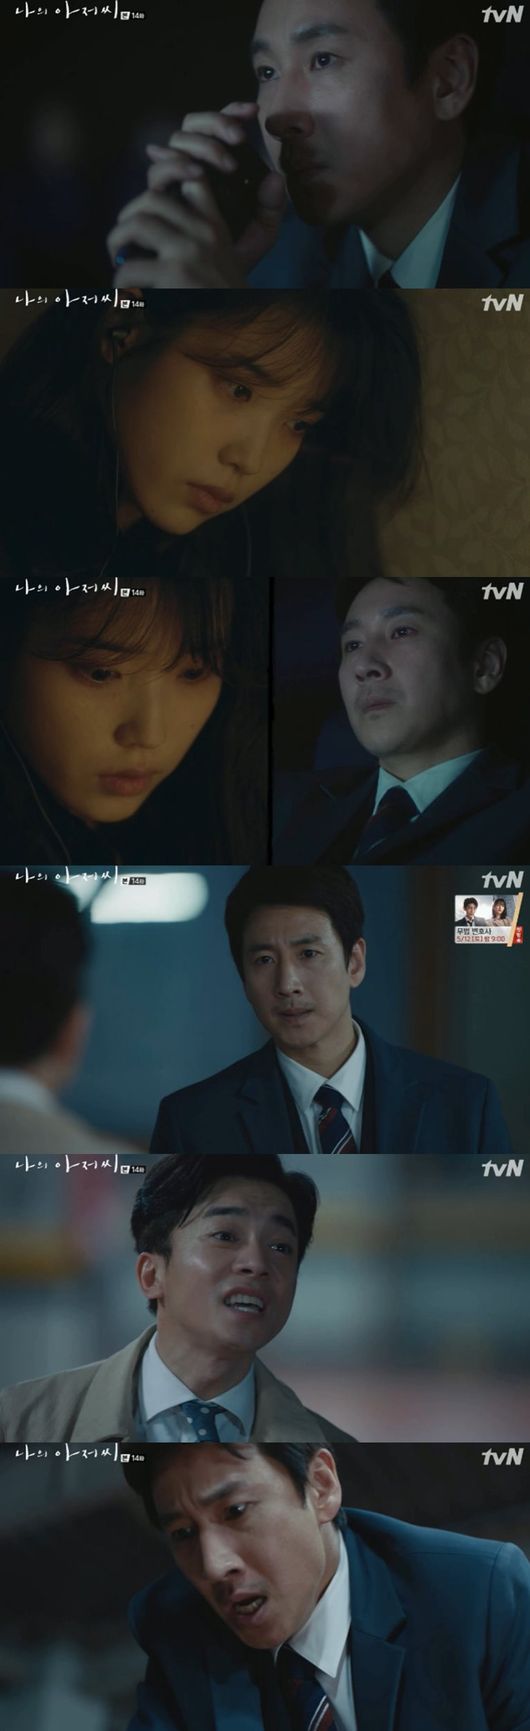 My uncle Lee Sun Gyun played an intense act that overwhelmed me with his eyes.In the 14th episode of the TVN tree drama My Uncle (playplayed by Park Hae-young/directed by Kim Won-seok) broadcast on the 10th, Park Dong-hoon (Lee Sun Gyun) was shown to learn about Lee Ji-euns Wiretapping.Park Dong-hoon could not hide his concern when Ijian disappeared.That night, Ijian called Park Dong-hoon on a pay phone and told Park Dong-hoon, who is angry that he should stop and tell him that he will quit. If you stop, will you do a farewell party for the child who killed a person?I hope you will disappear as soon as possible because you are afraid. It does not matter. It is not once or twice. It was the first time. Someone whos been good four times. Someone like me. Someone I liked. I dont care if Im born again.I can be born again, said Park Dong-hoon, who gave Park Dong-hoon a heartfelt gratitude. Park Dong-hoon said to Lee Ji-an, Is it a good greeting when I meet you?Call me when your grandmother dies. Since then, Park Dong-hoon has become a managing director and his family and neighborhood people have all been happy as their own.Park Dong-hoon, however, continued to feel Ijian, and then Park Sang-moo (Jung Hae-gyun) learned about Lee Ji-ans Wiretapping.Park Dong-hoon, who also learned that there was a deal between Lee Ji-an and Do Joon-young (Kim Young-min).The first time he visited Do Jun-young, he asked, What did you do with him? He started first, You picked up such a bitch, I was dirty, Did you cheat on me?You guys? he said, punching Do Jun-young, who provokes him.And at the end of the broadcast, Park Dong-hoon said to his cell phone, Ijian, give me a phone, making me wonder about the next episode.Lee Sun Gyun was impressed by the deep-eyed Acting of Park Dong-hoons feelings, such as how he was saddened by Ijian, shocked by the fact of Wiretapping, and angry at Do Jun-young.Park Dong-hoons heart was conveyed only by the expression on the screen that he did not speak.Moreover, My Uncle is heading to the last peak story as Park Dong-hoon becomes managing director and finds out Ijians Wiretapping fact.In the story that is gradually rising, Lee Sun Gyun is showing a lot of expectation for the future performance and Park Dong-hoons sentiment line.Capture the broadcast screen of My Uncle.